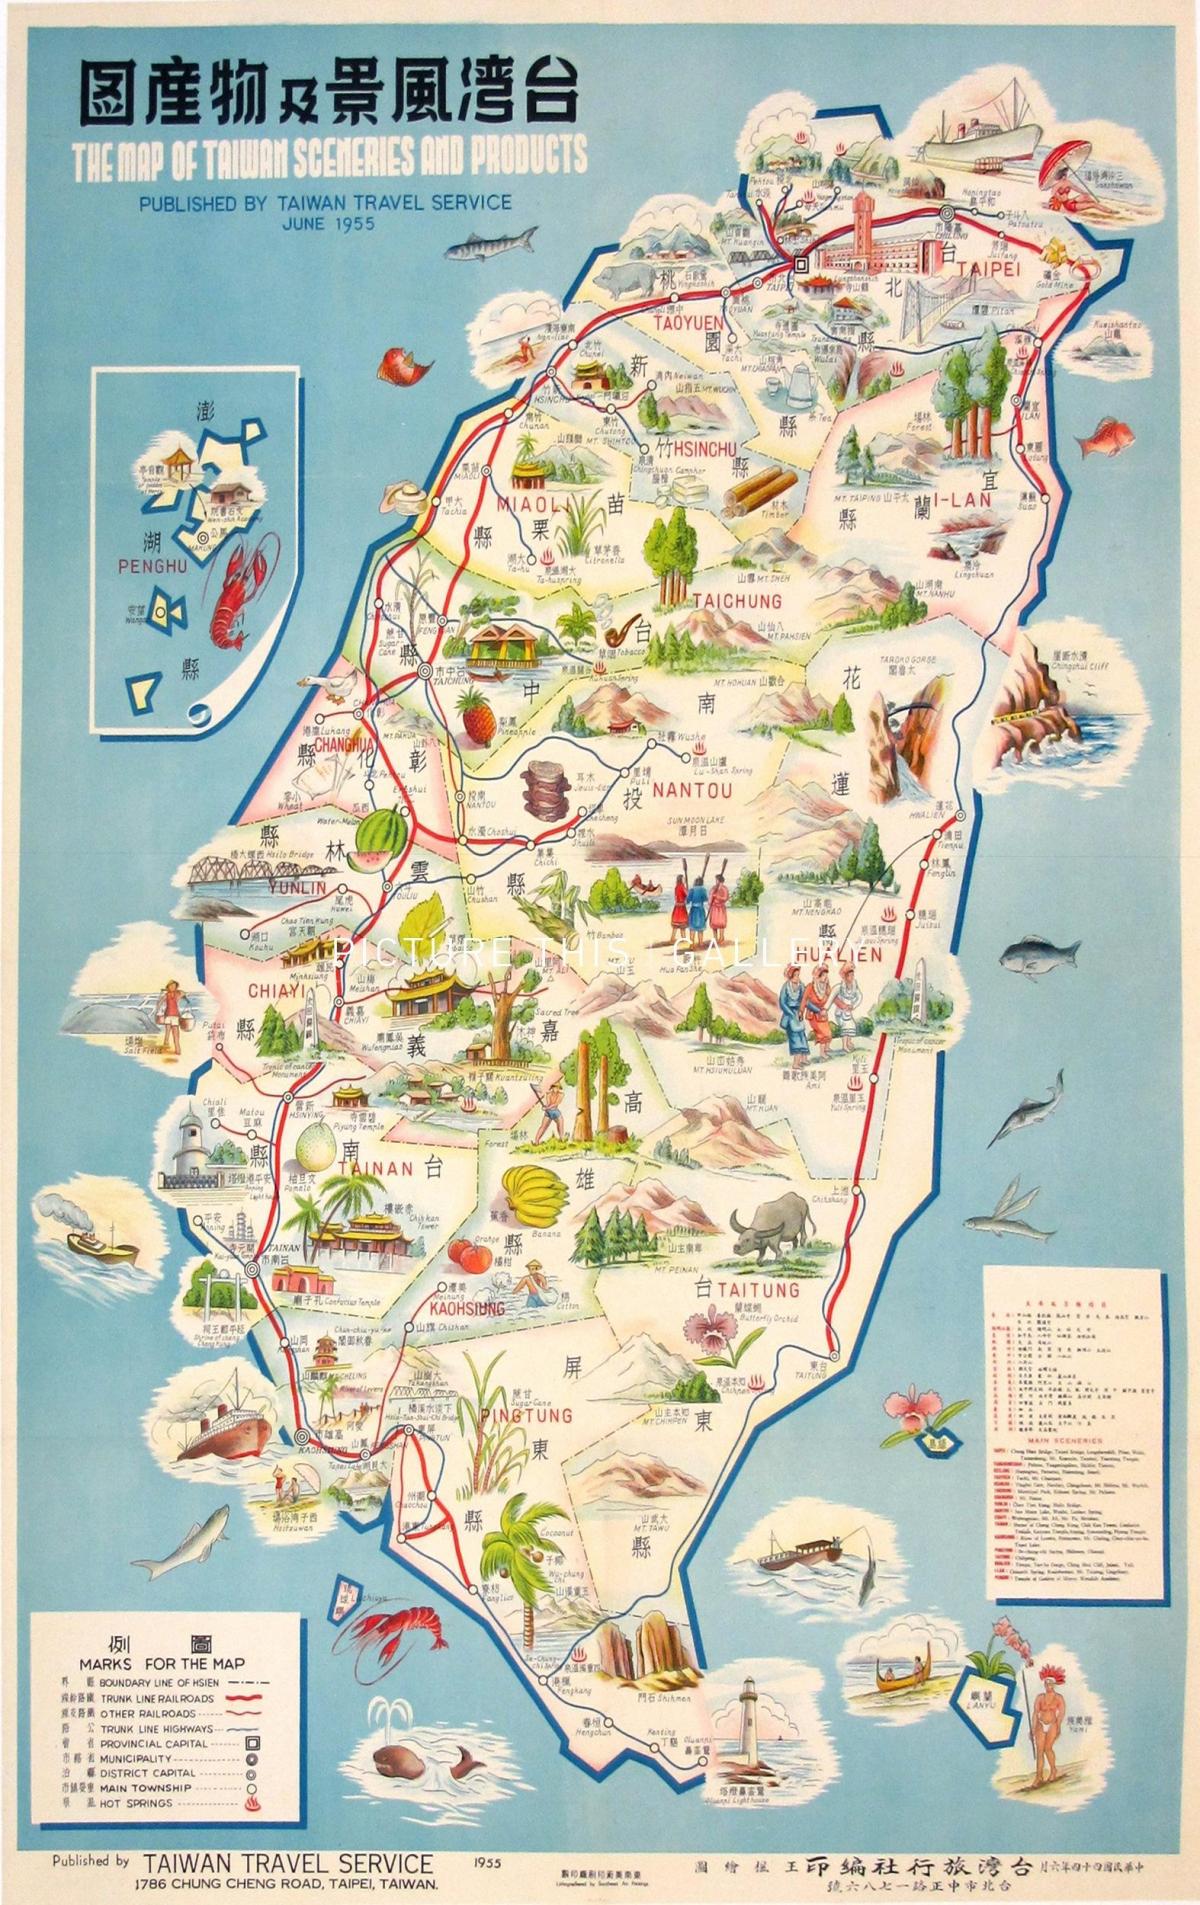 Taiwan tourist attractions map